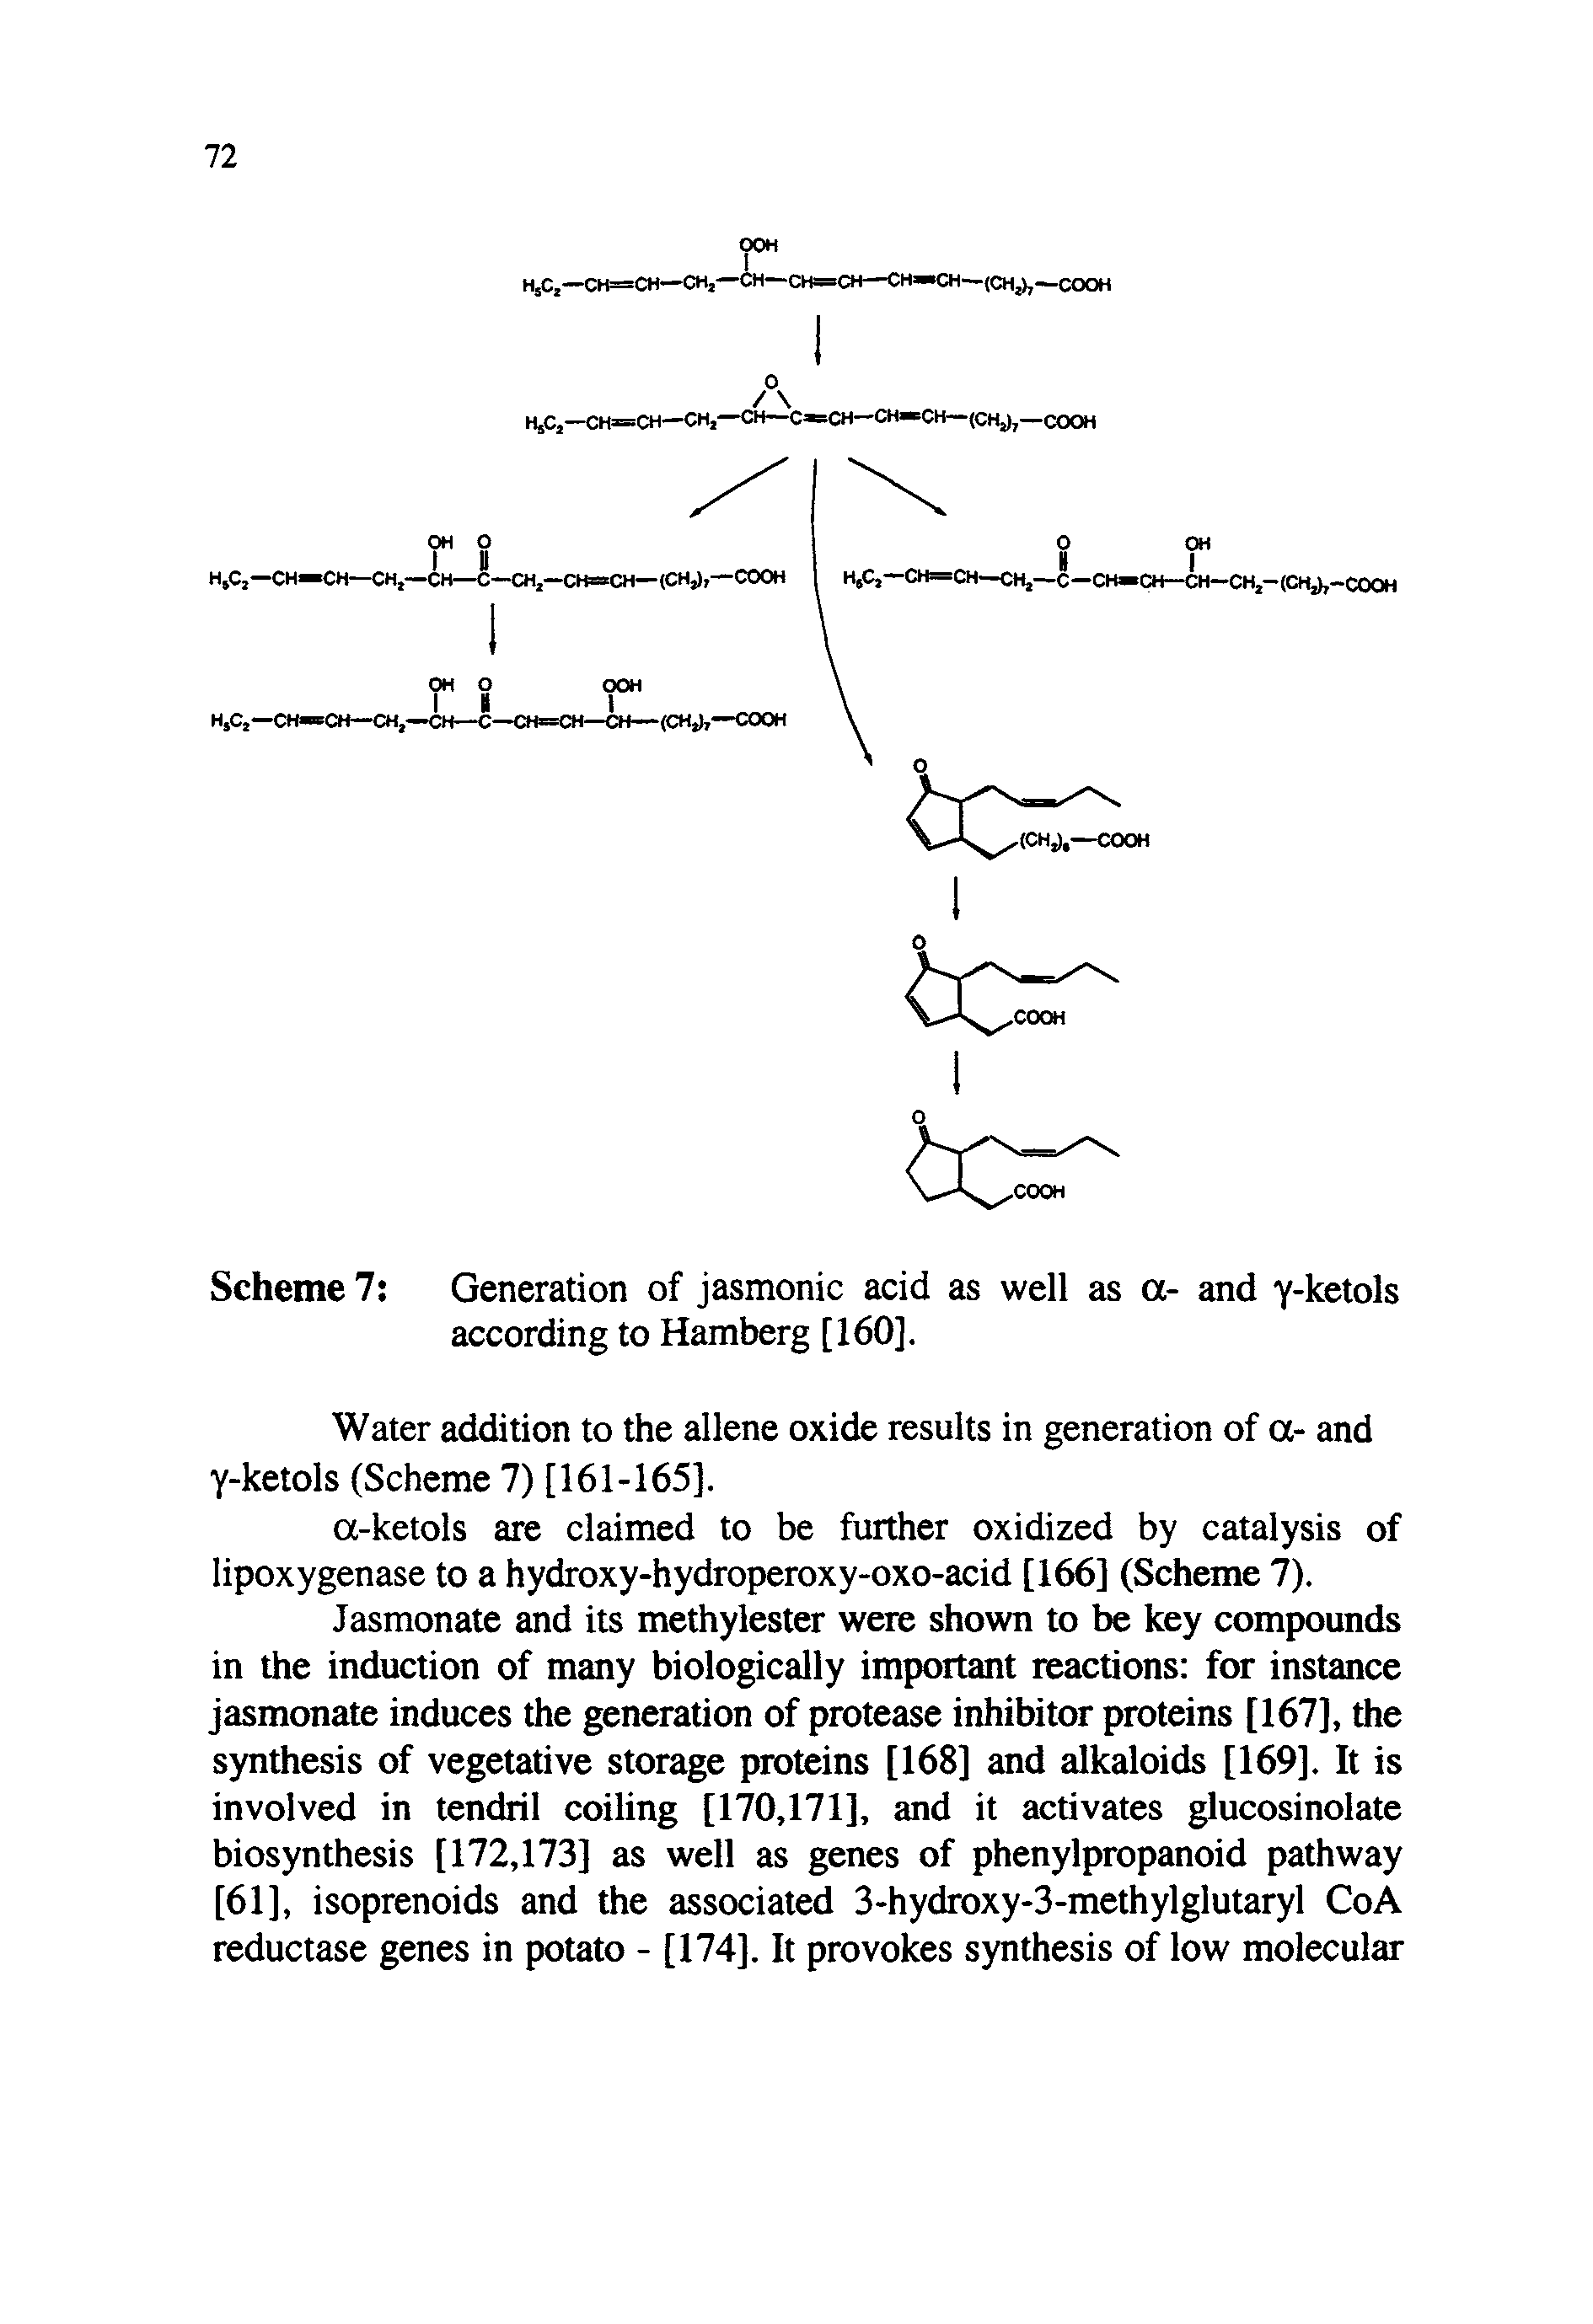 Scheme Generation of jasmonic acid as well as a- and y-ketols according to Hamberg [160].